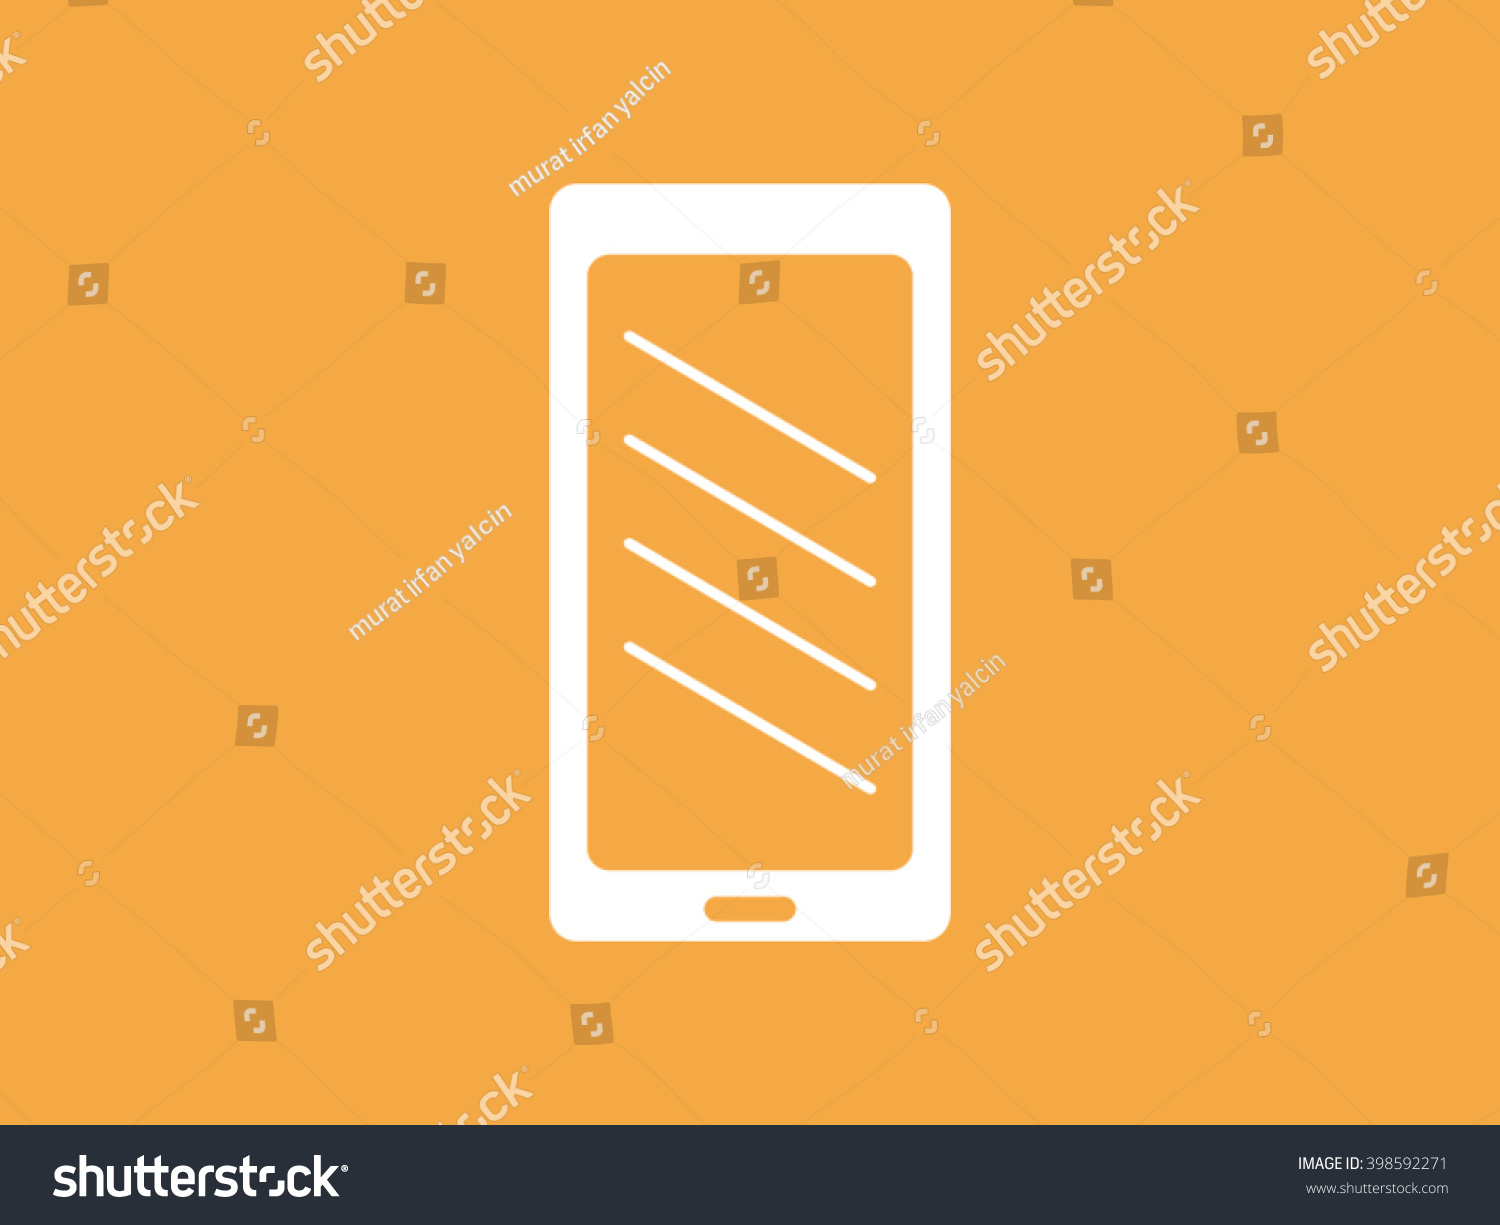 Mobile Phone Silhouette Stock Vector Royalty Free 398592271